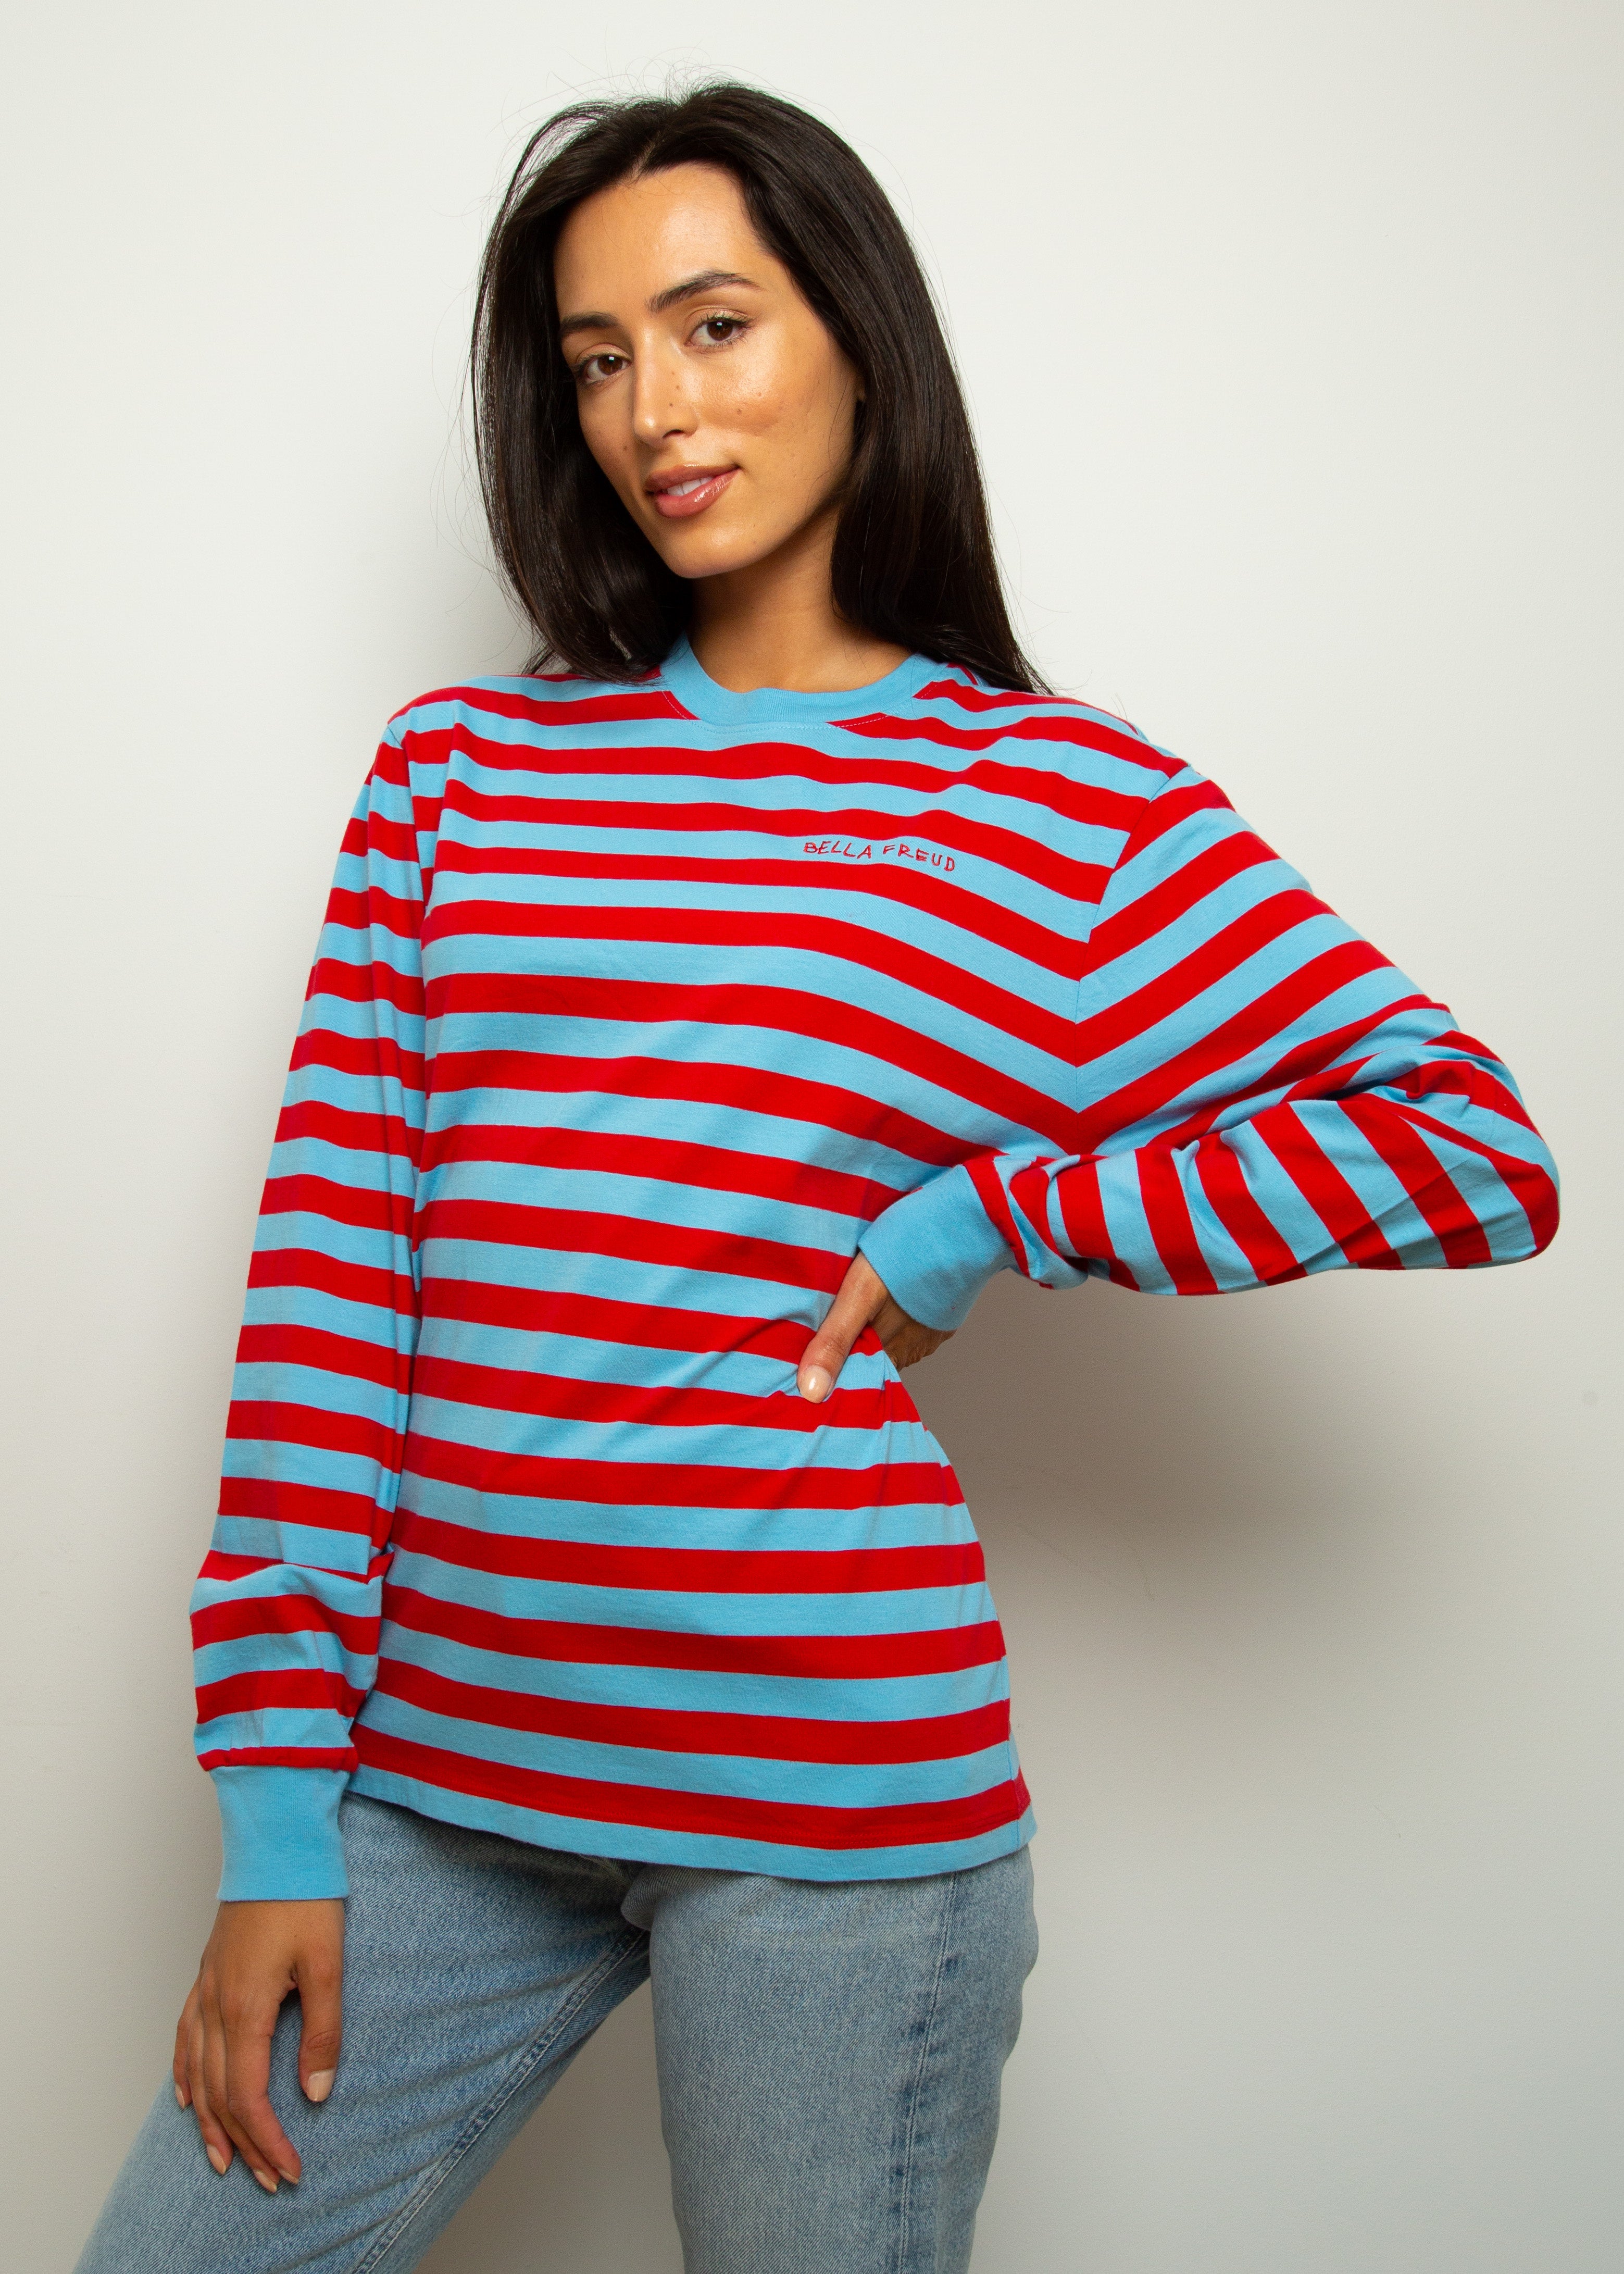 BF LS Striped Top in Blue, Red